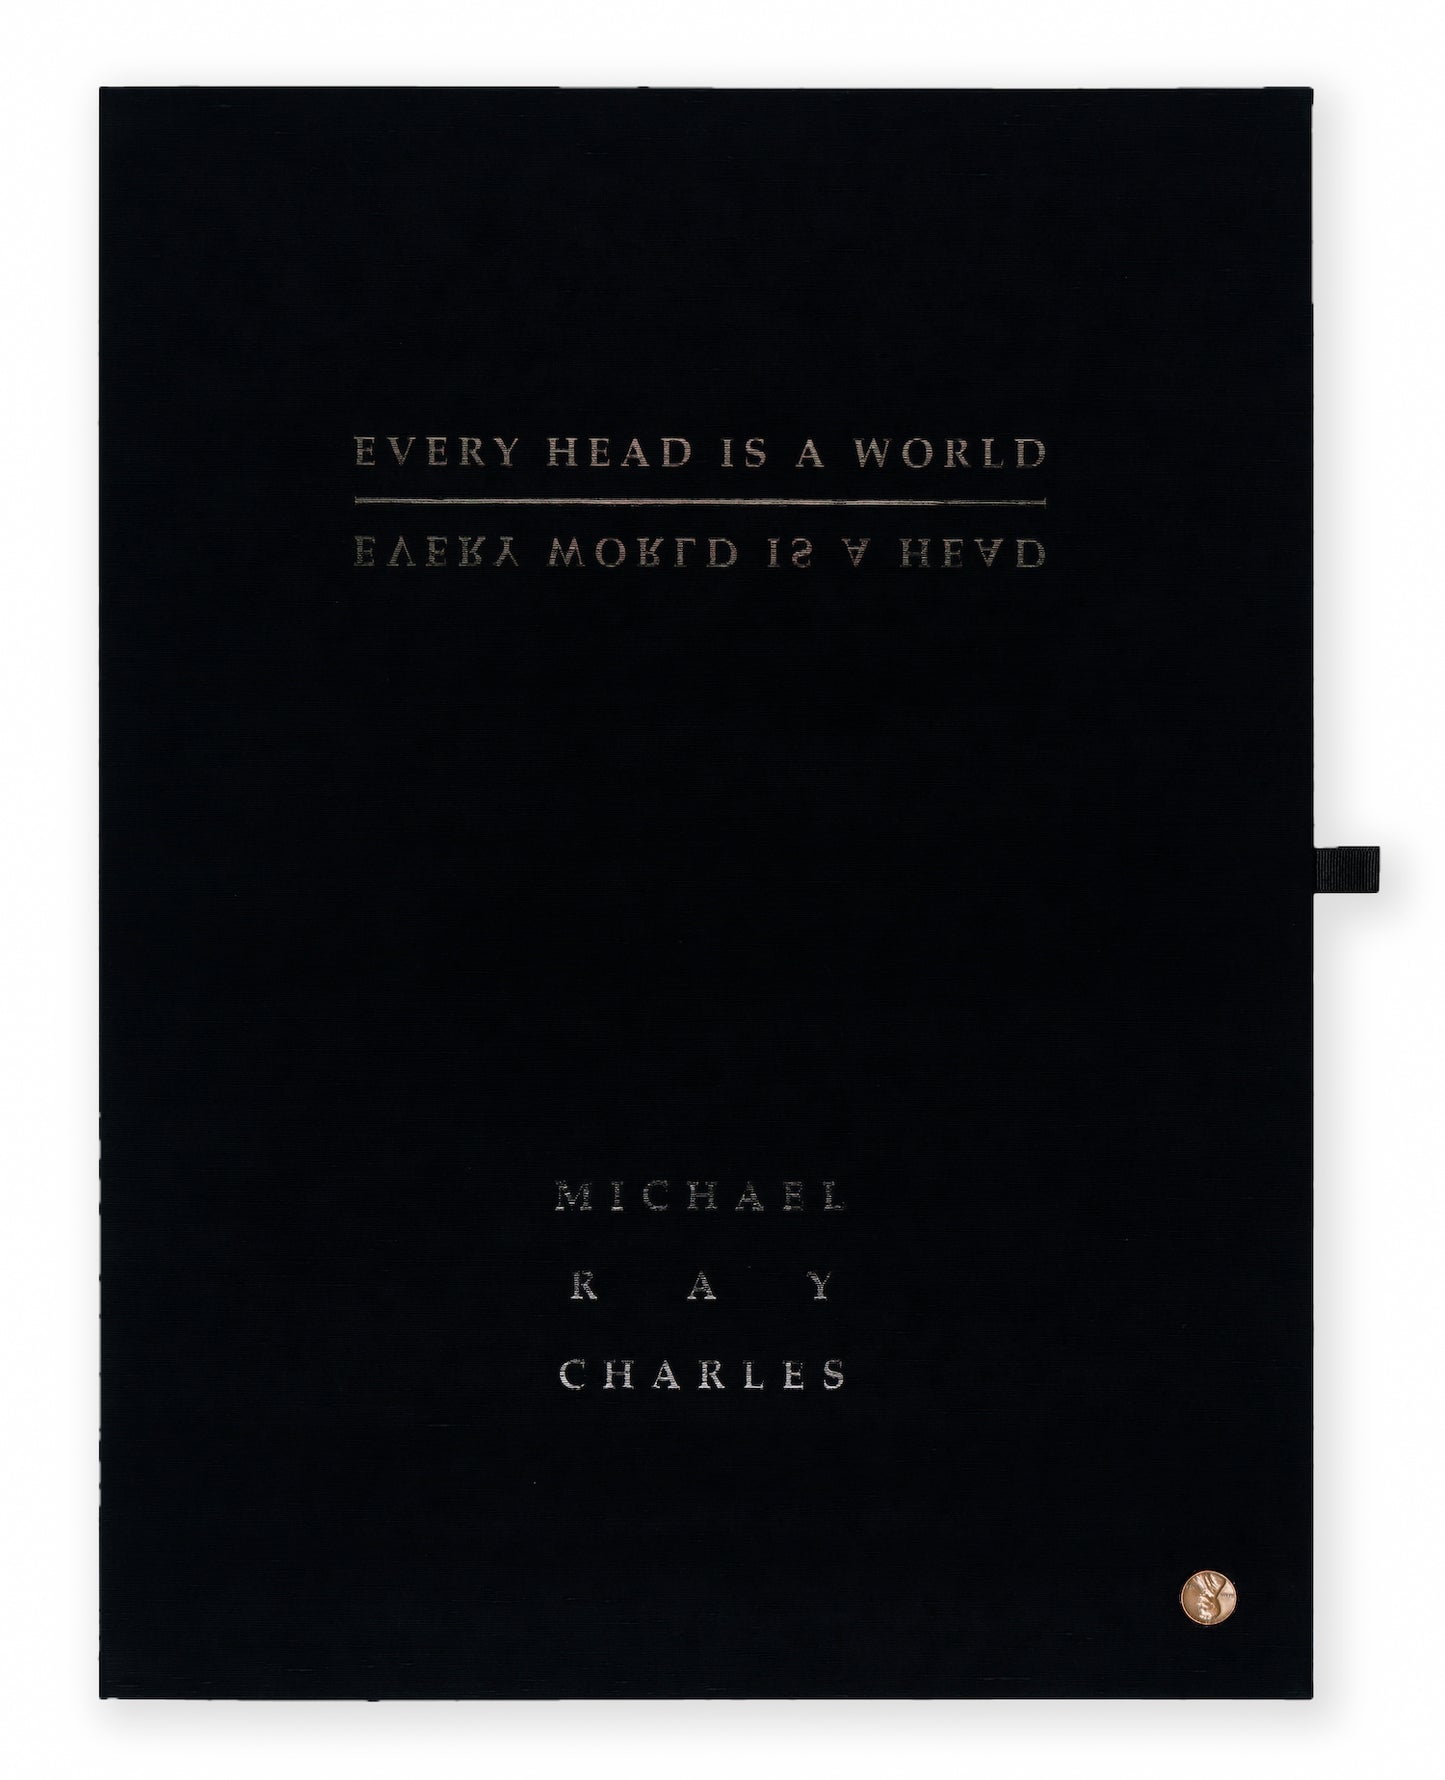 Charles, Michael Ray "Every World Is A Head, Every Head Is A World"